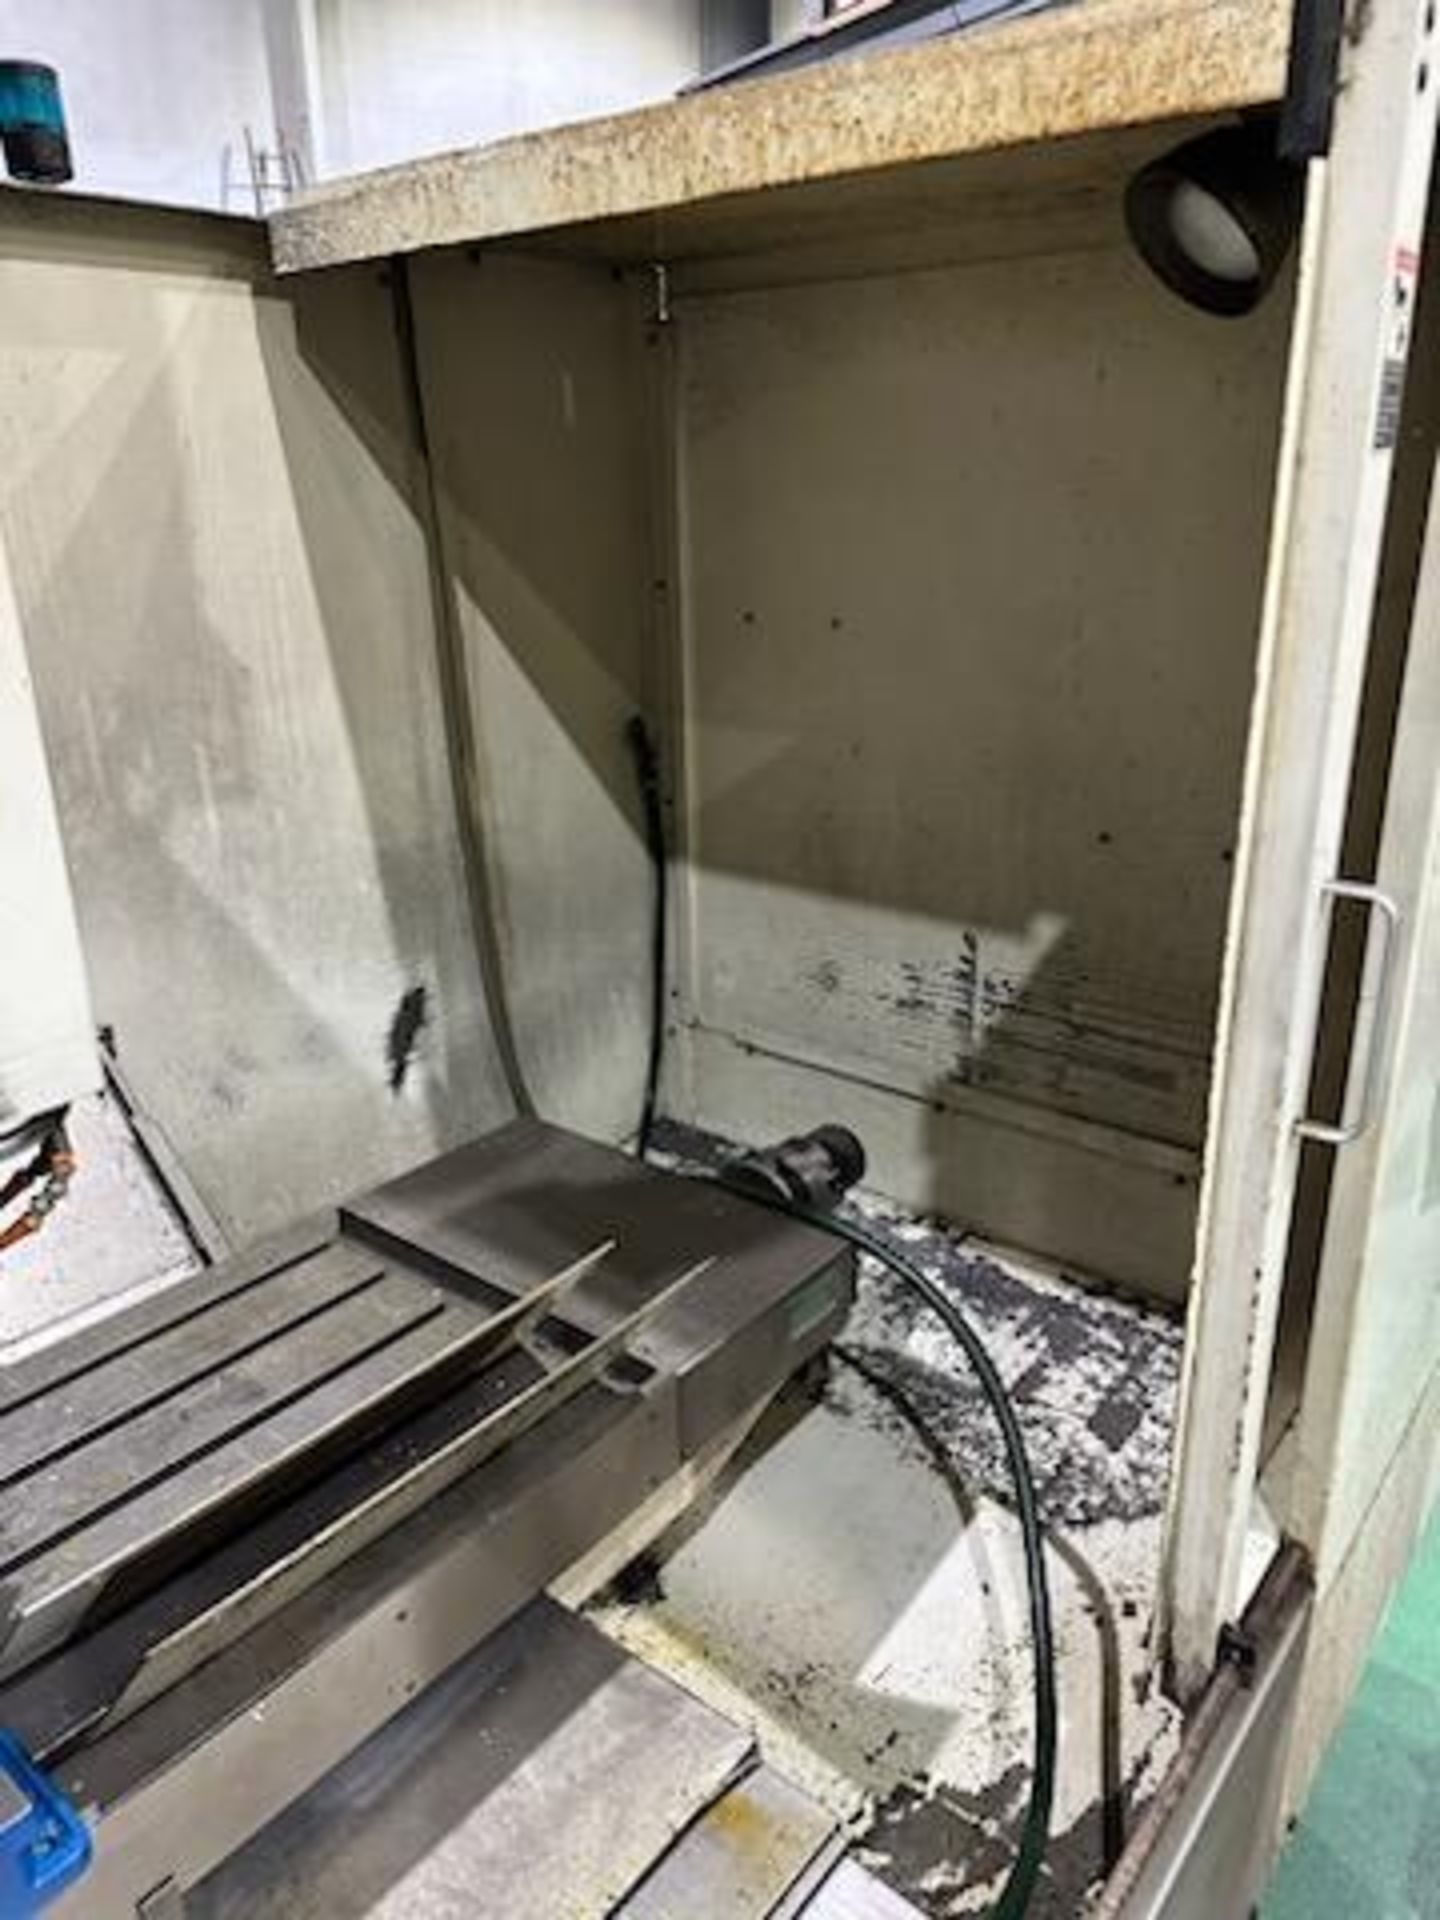 1995 FADAL 4020 CNC VERTICAL MACHINING CENTER - Image 3 of 9